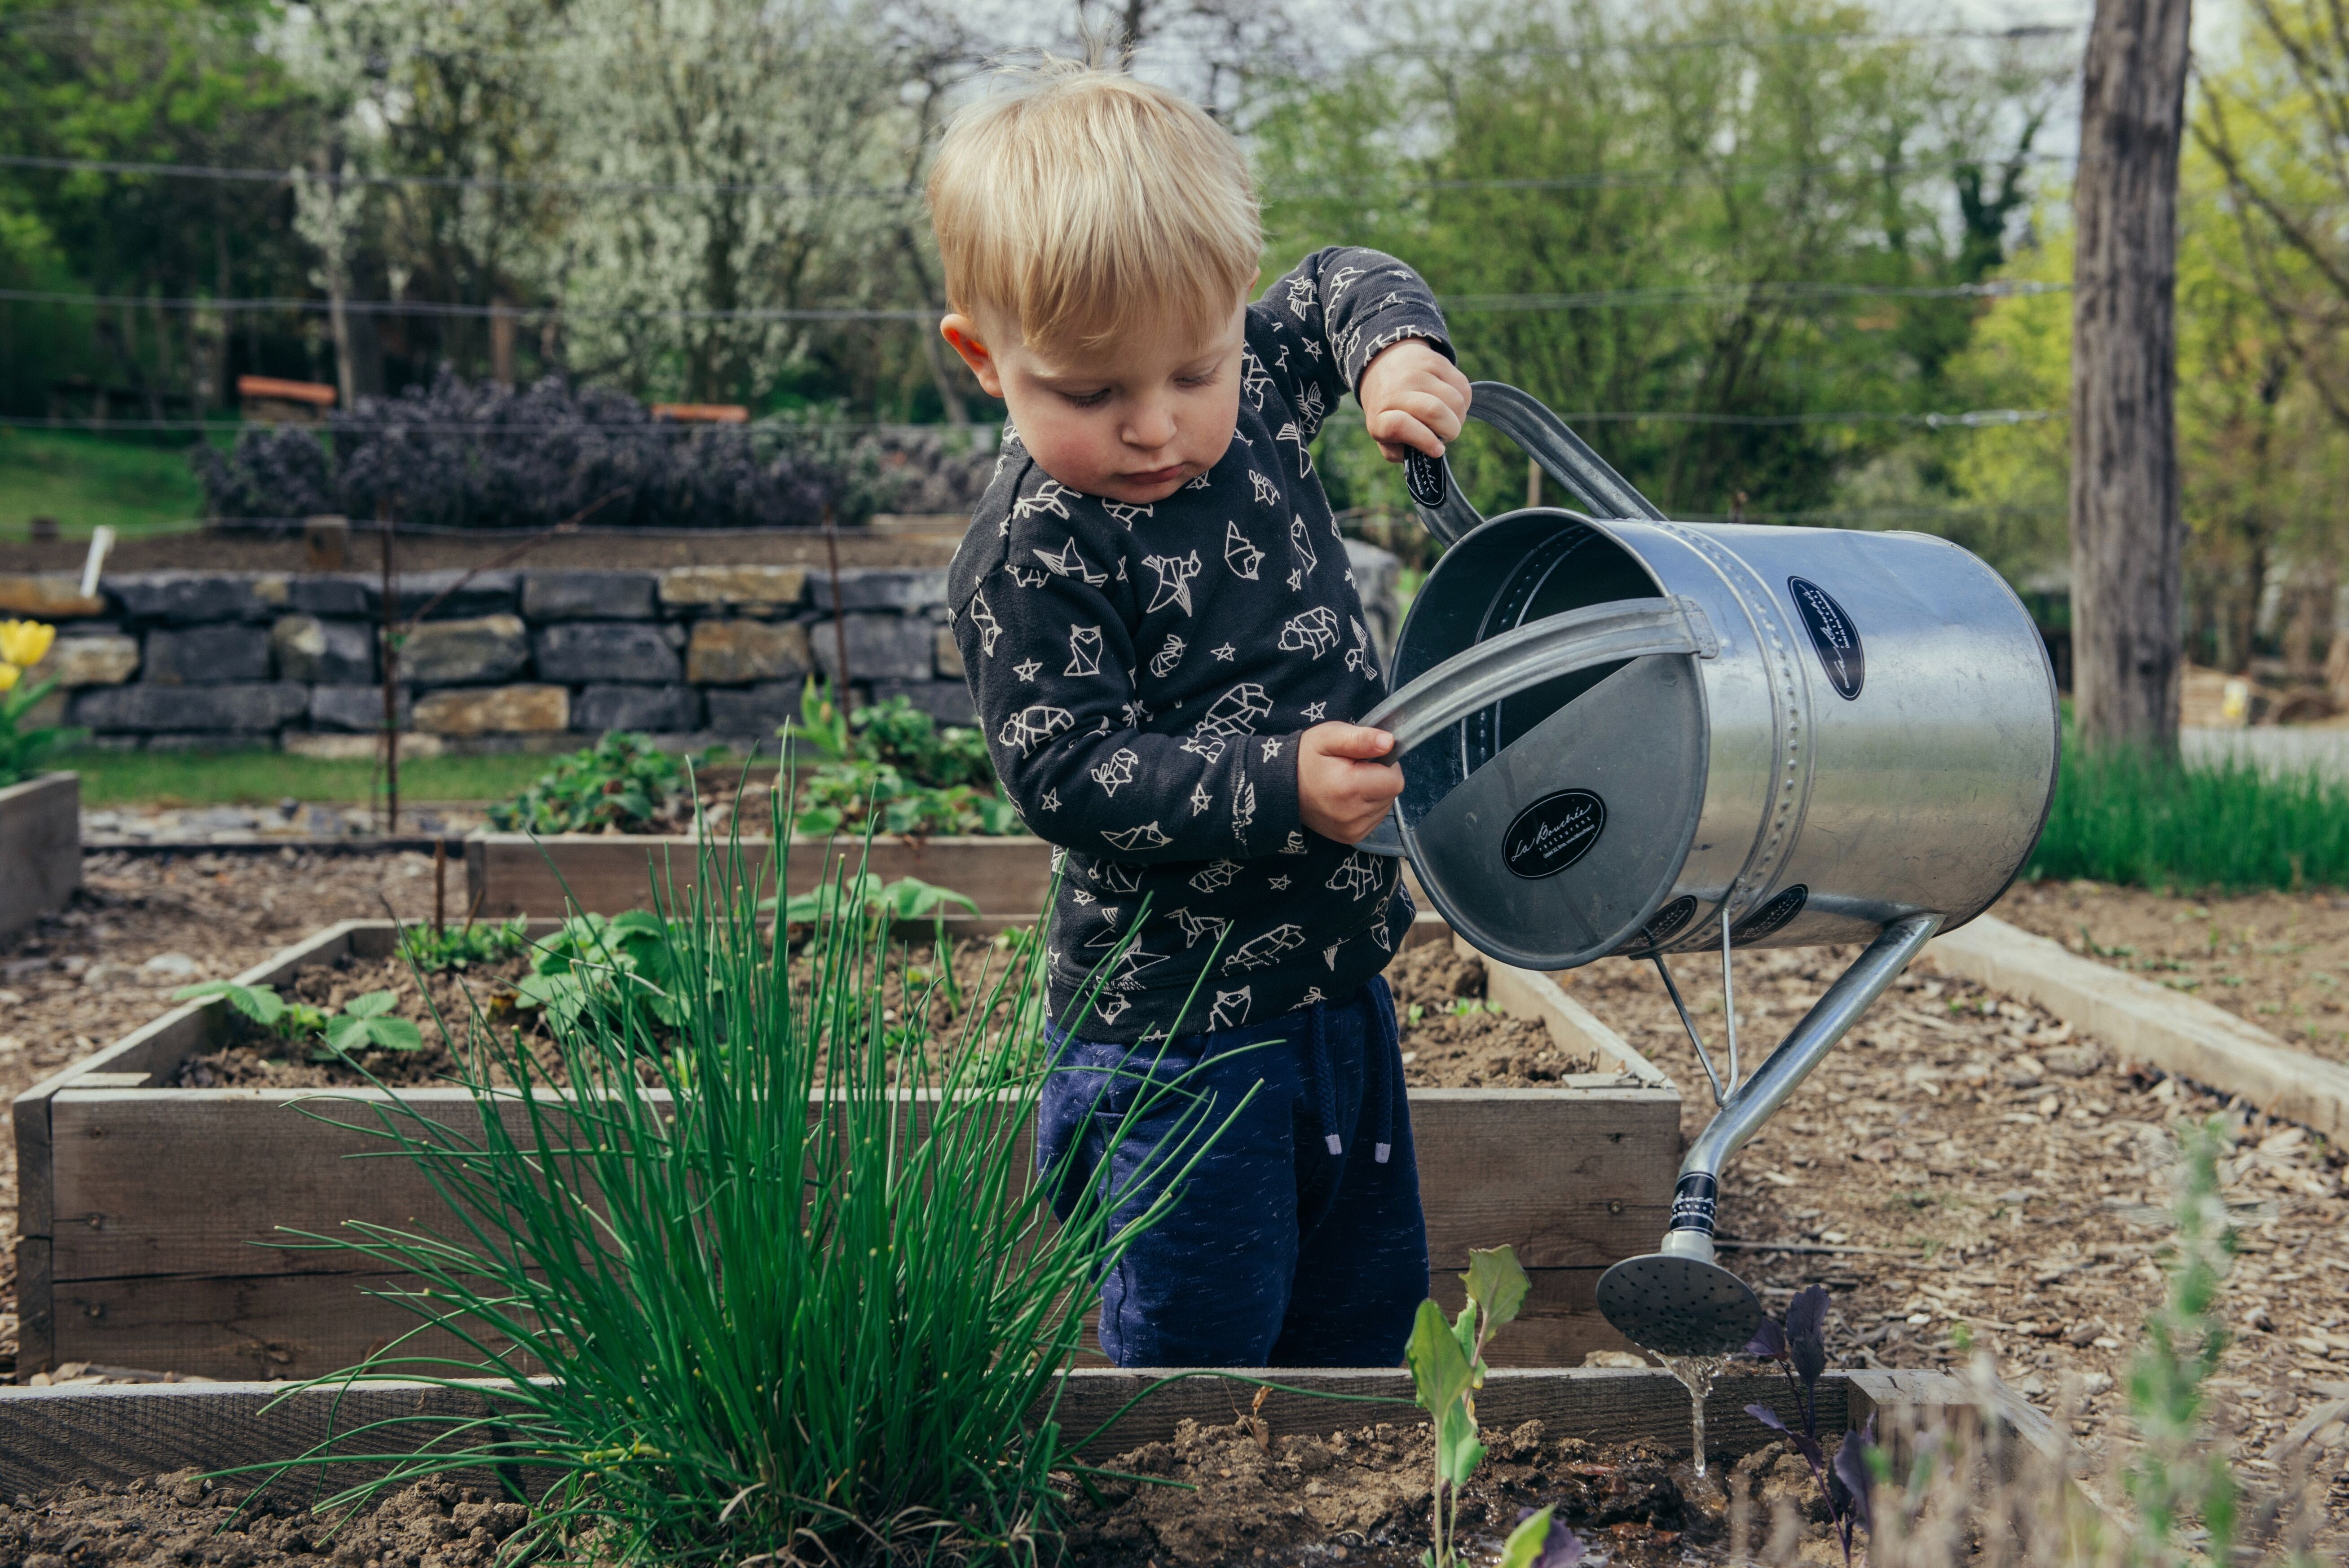 The benefits of urban agriculture for children